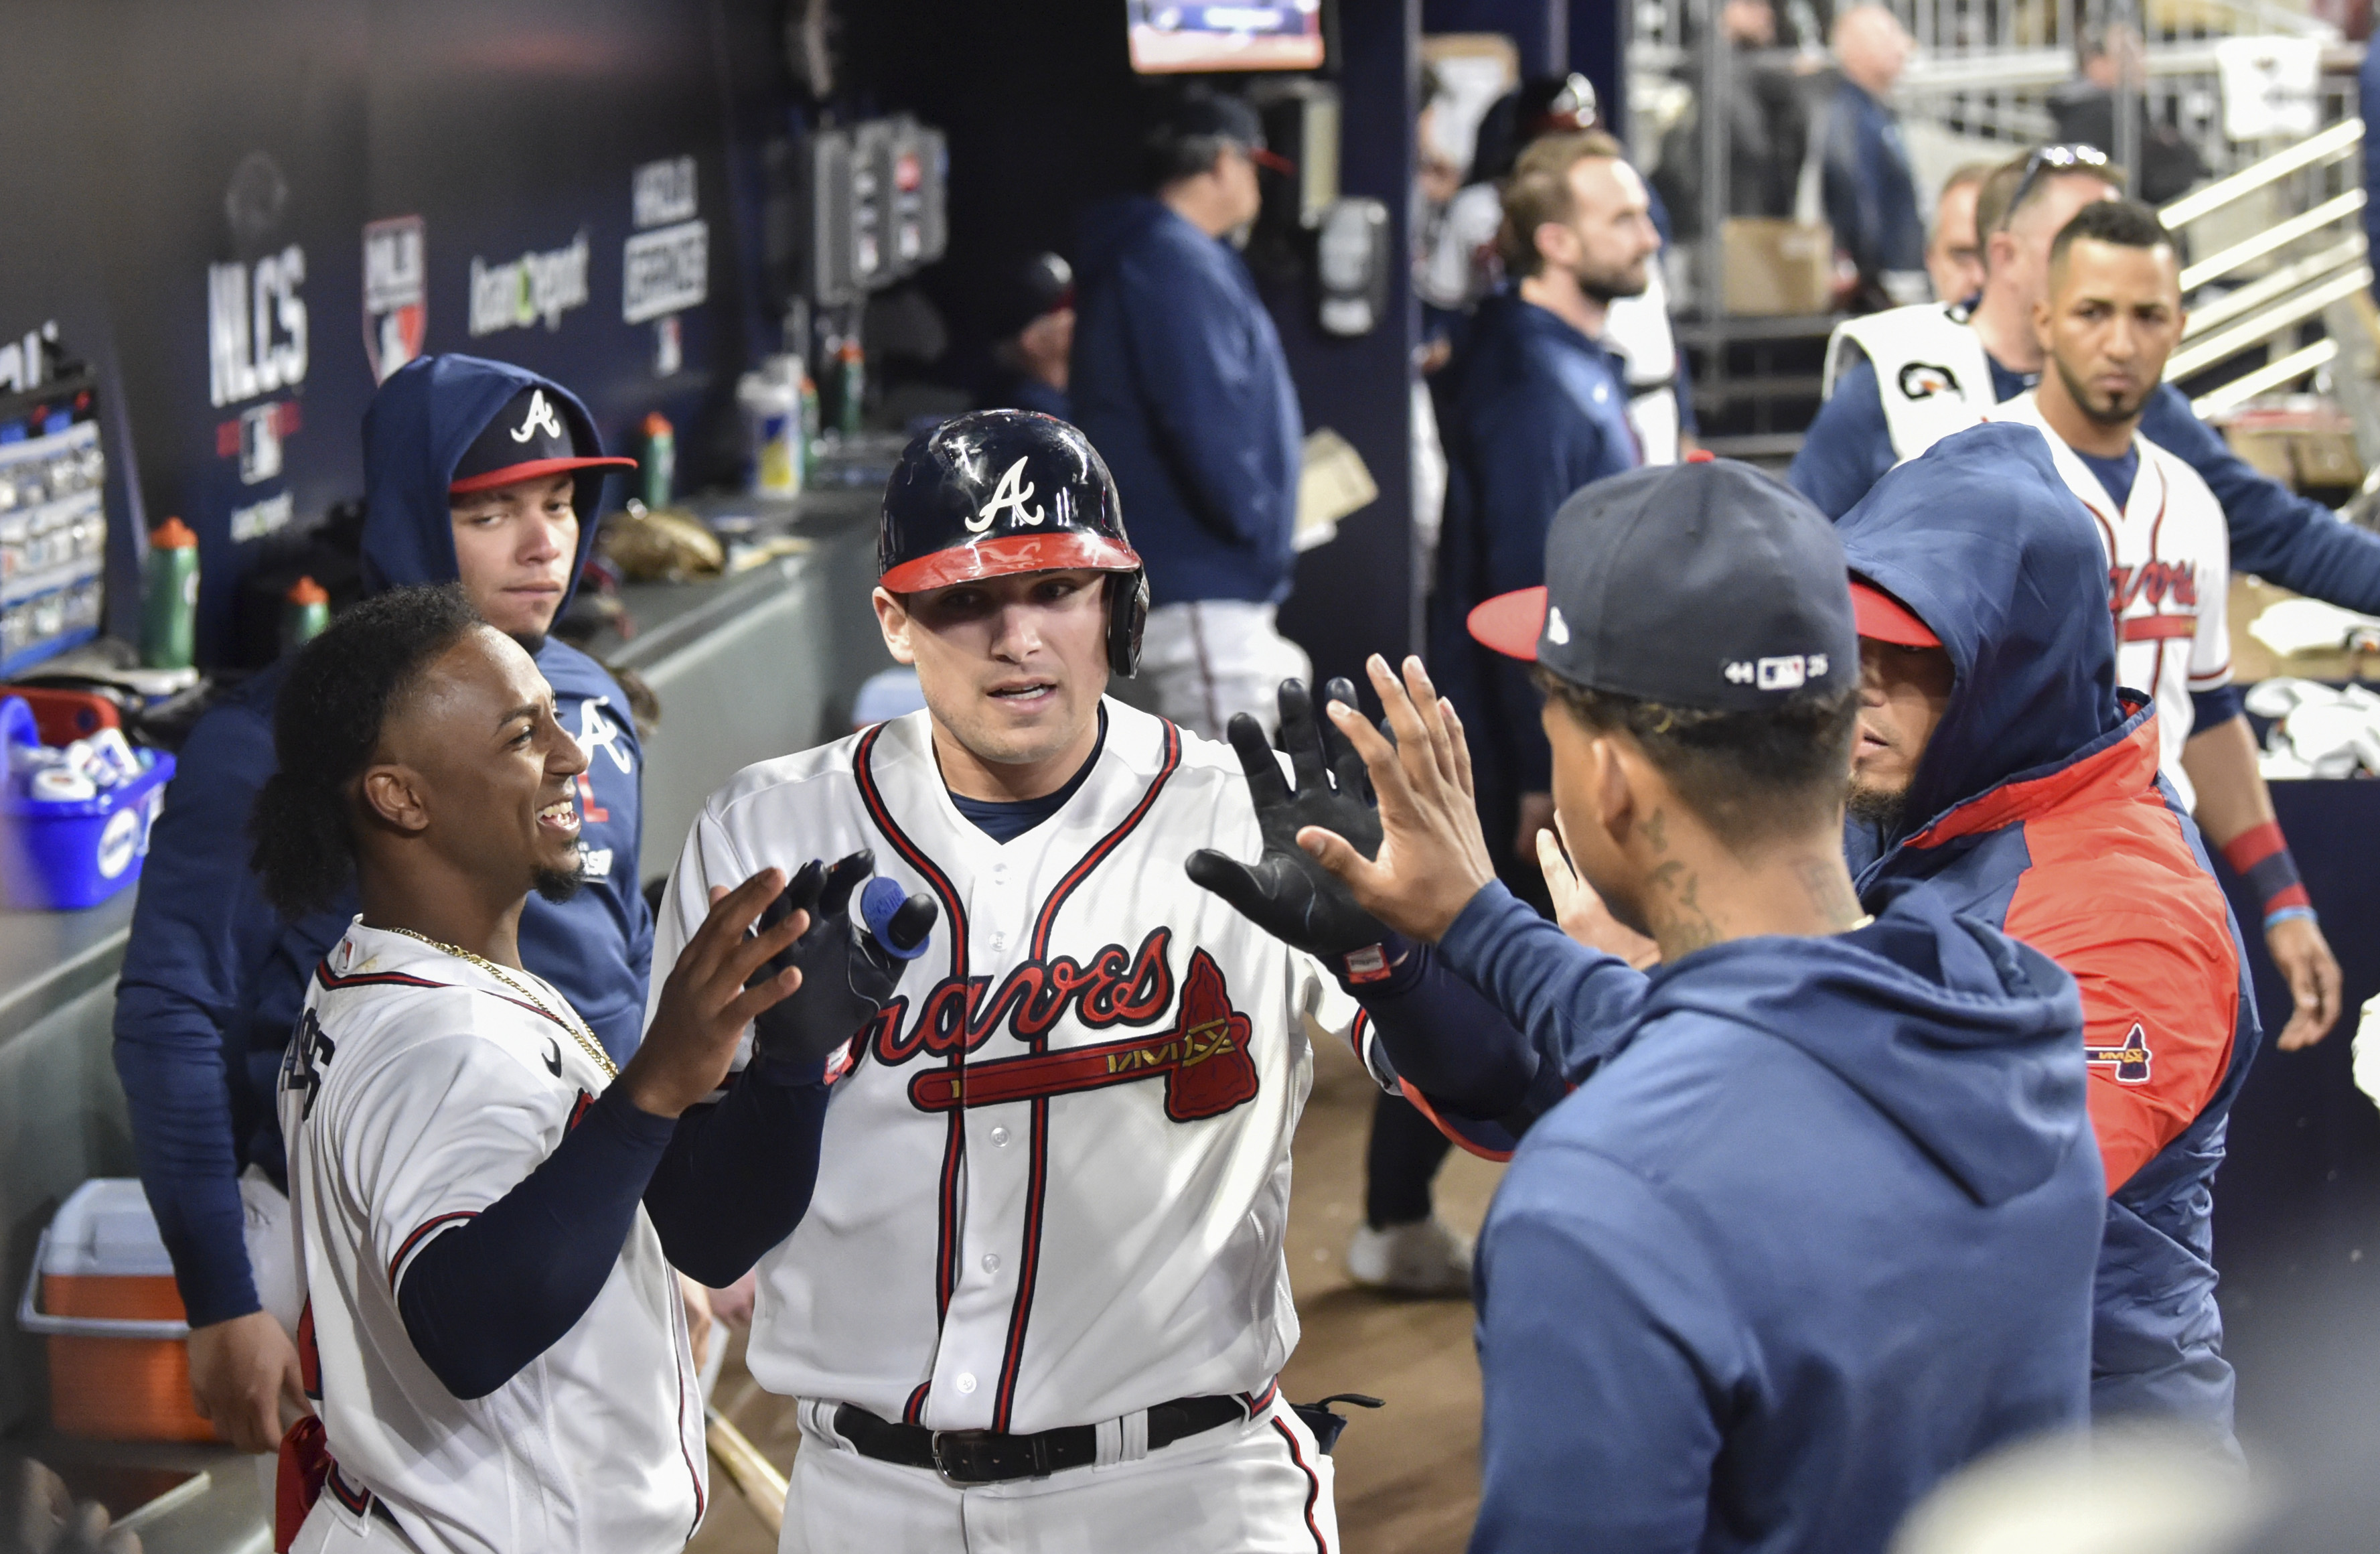 Braves defeat Dodgers 3-2 on walk-off single in NLCS Game 1 - Los